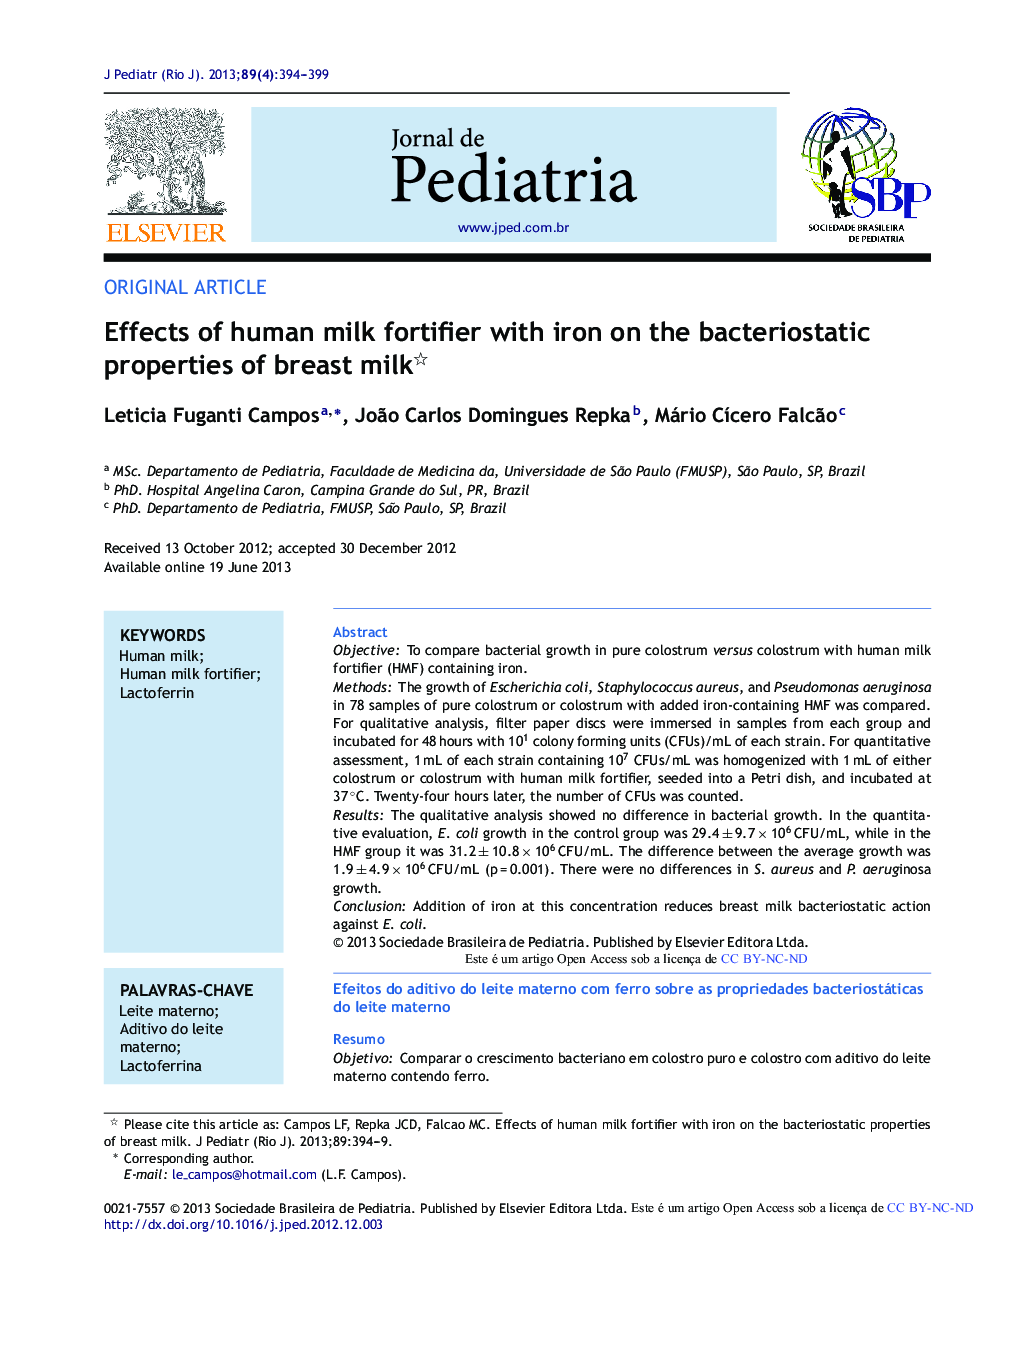 Effects of human milk fortifier with iron on the bacteriostatic properties of breast milk 